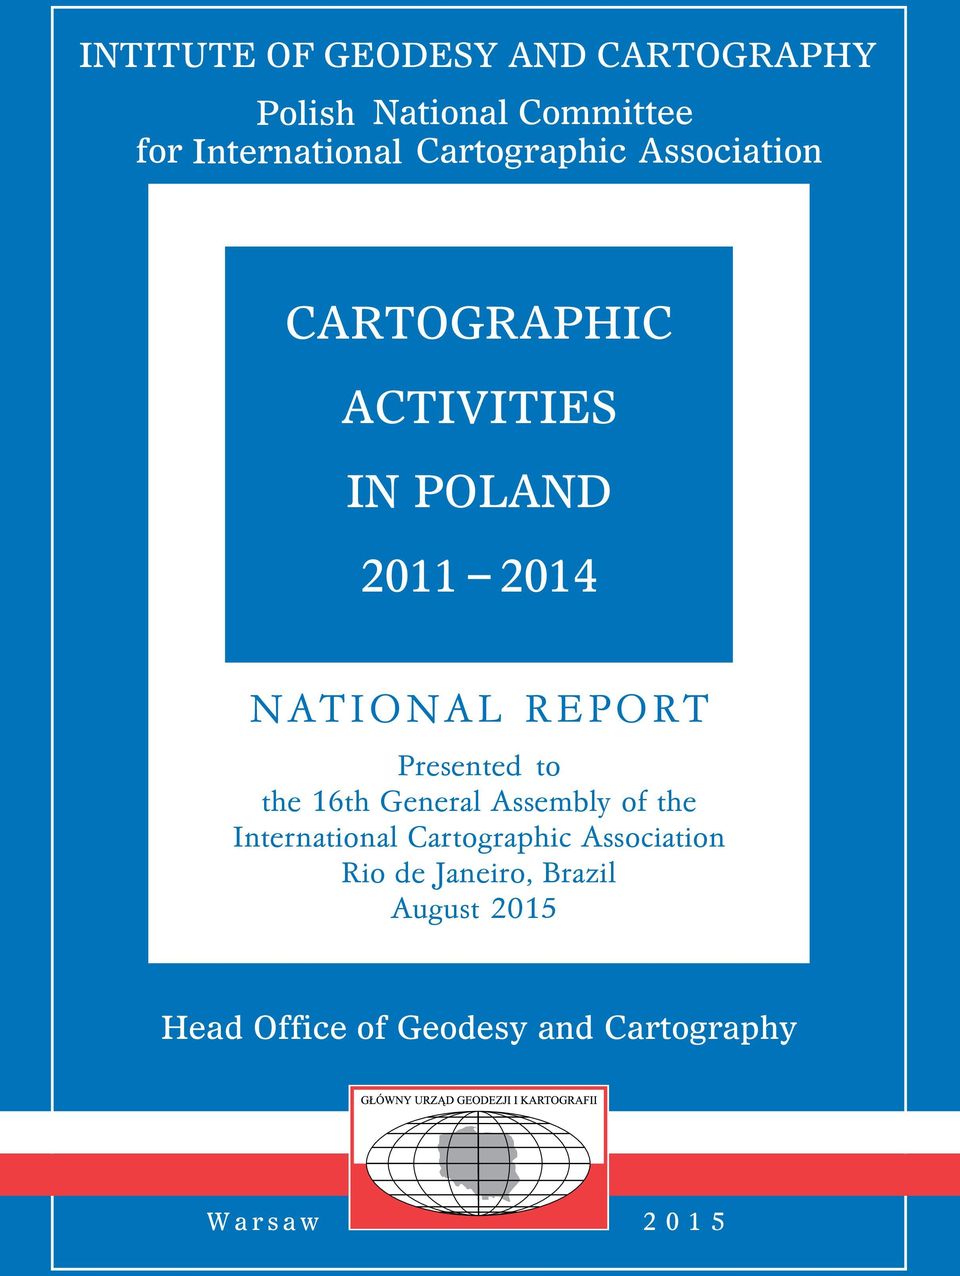 REPORT Presented to the 16th General Assembly of the International Cartographic